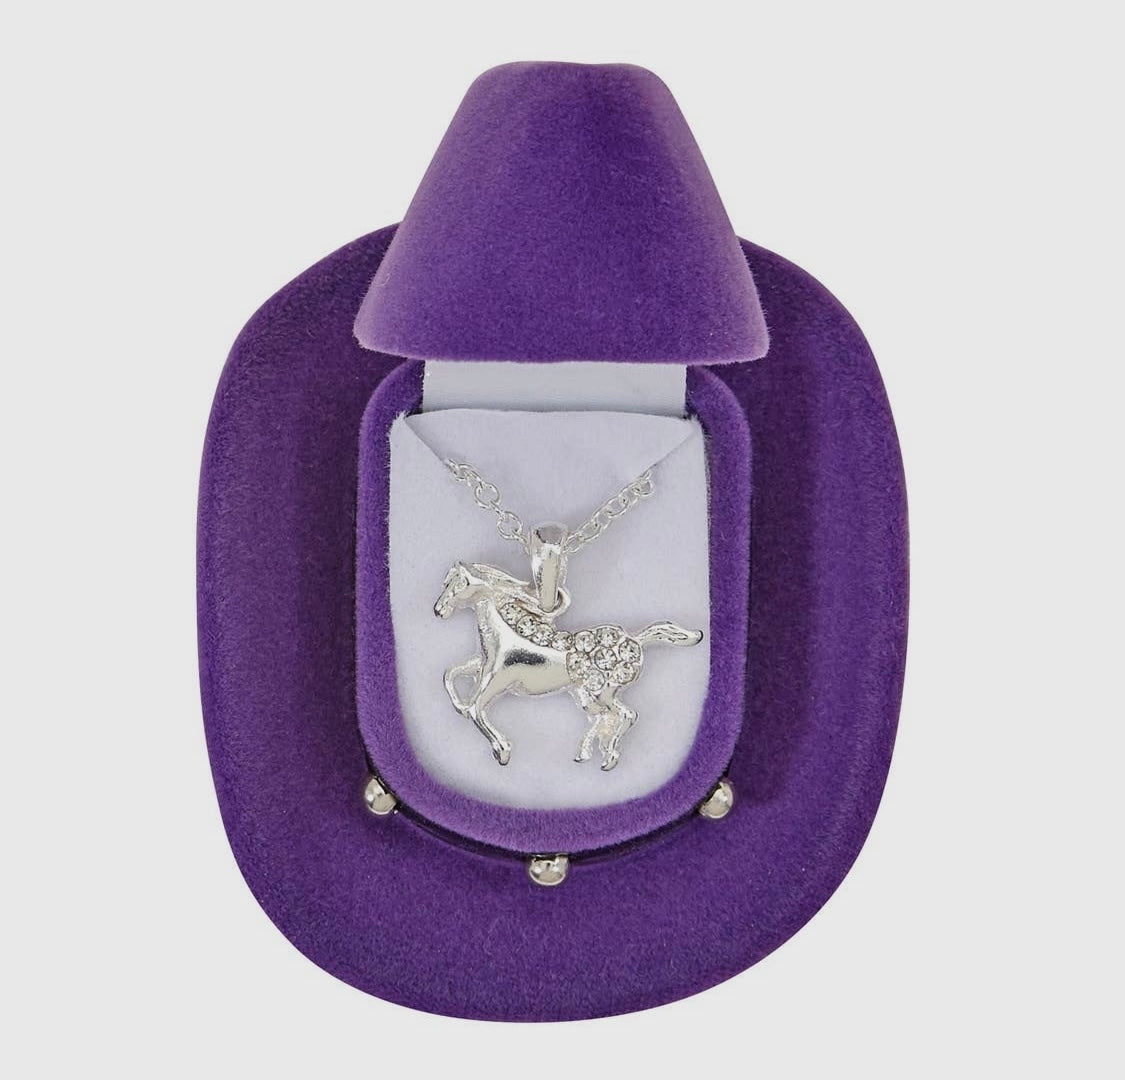 Galloping Horse Necklace in Cowboy Hat Box